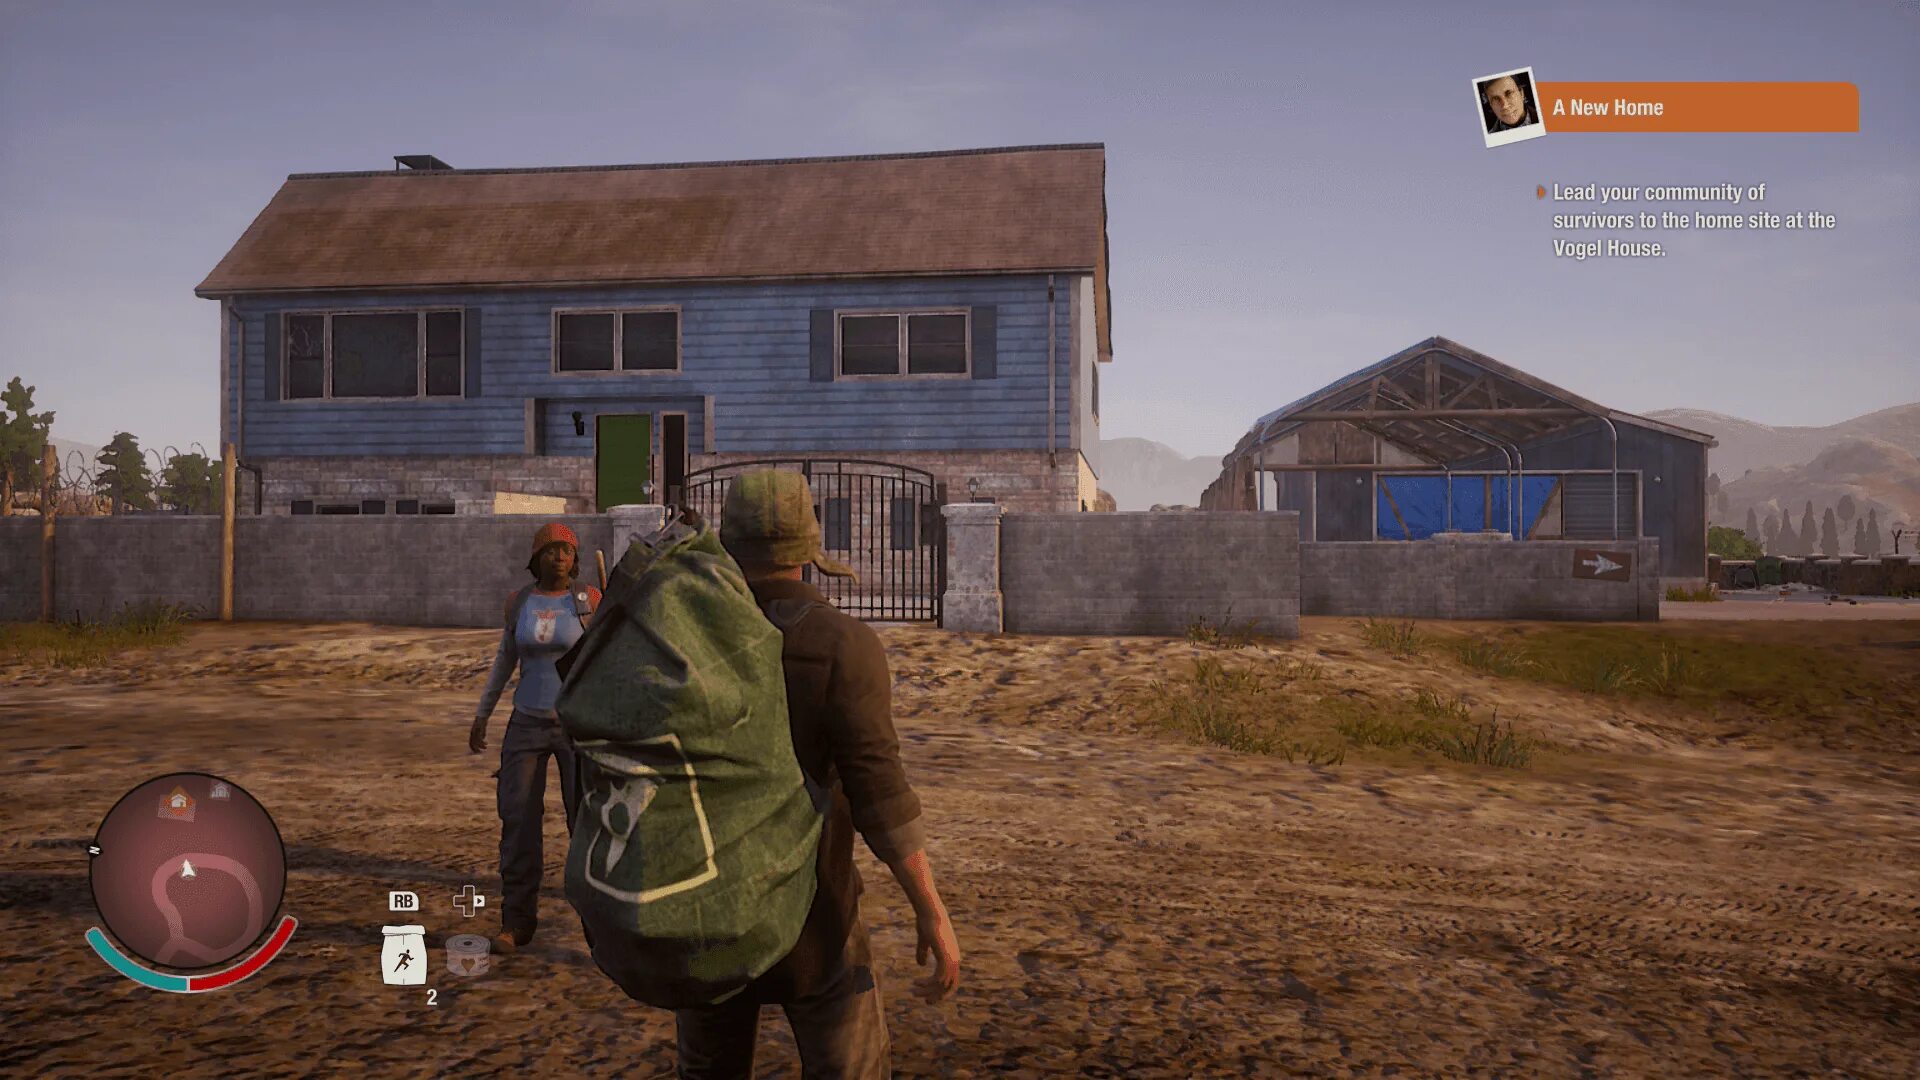 State of Decay 2. State of Decay 2 базы. State of Decay 2 база. Базы в Стейт оф Дикей 2. State of decay 2 сохранения